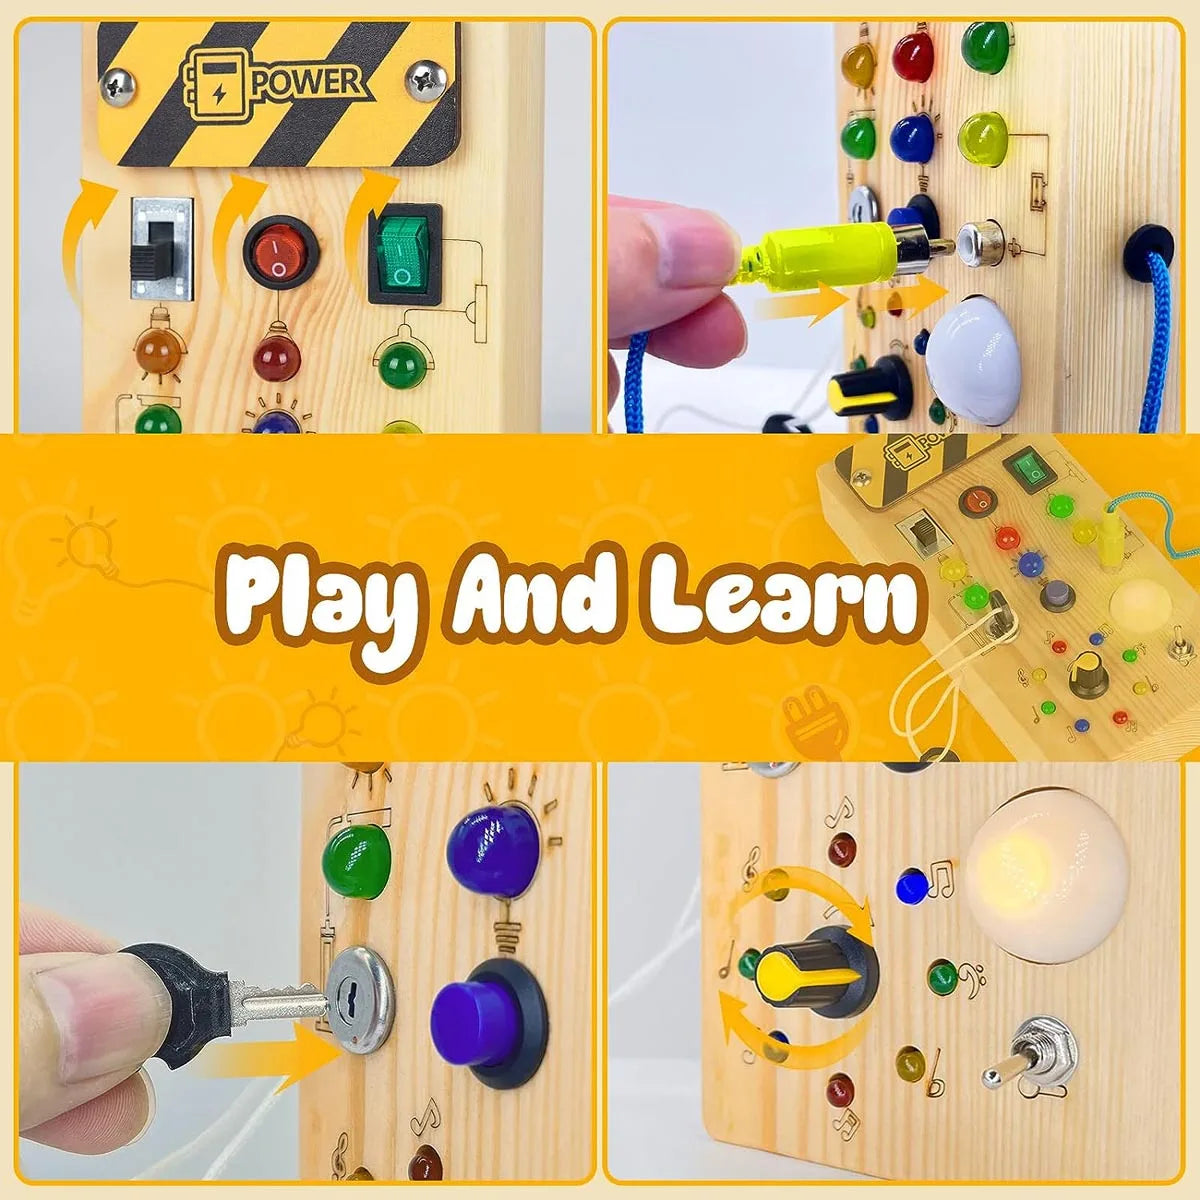 Montessori Busy Board Sensory Toys Wooden With LED Light Switch Control Board Travel Activities Children Games For 2-4 Years Old